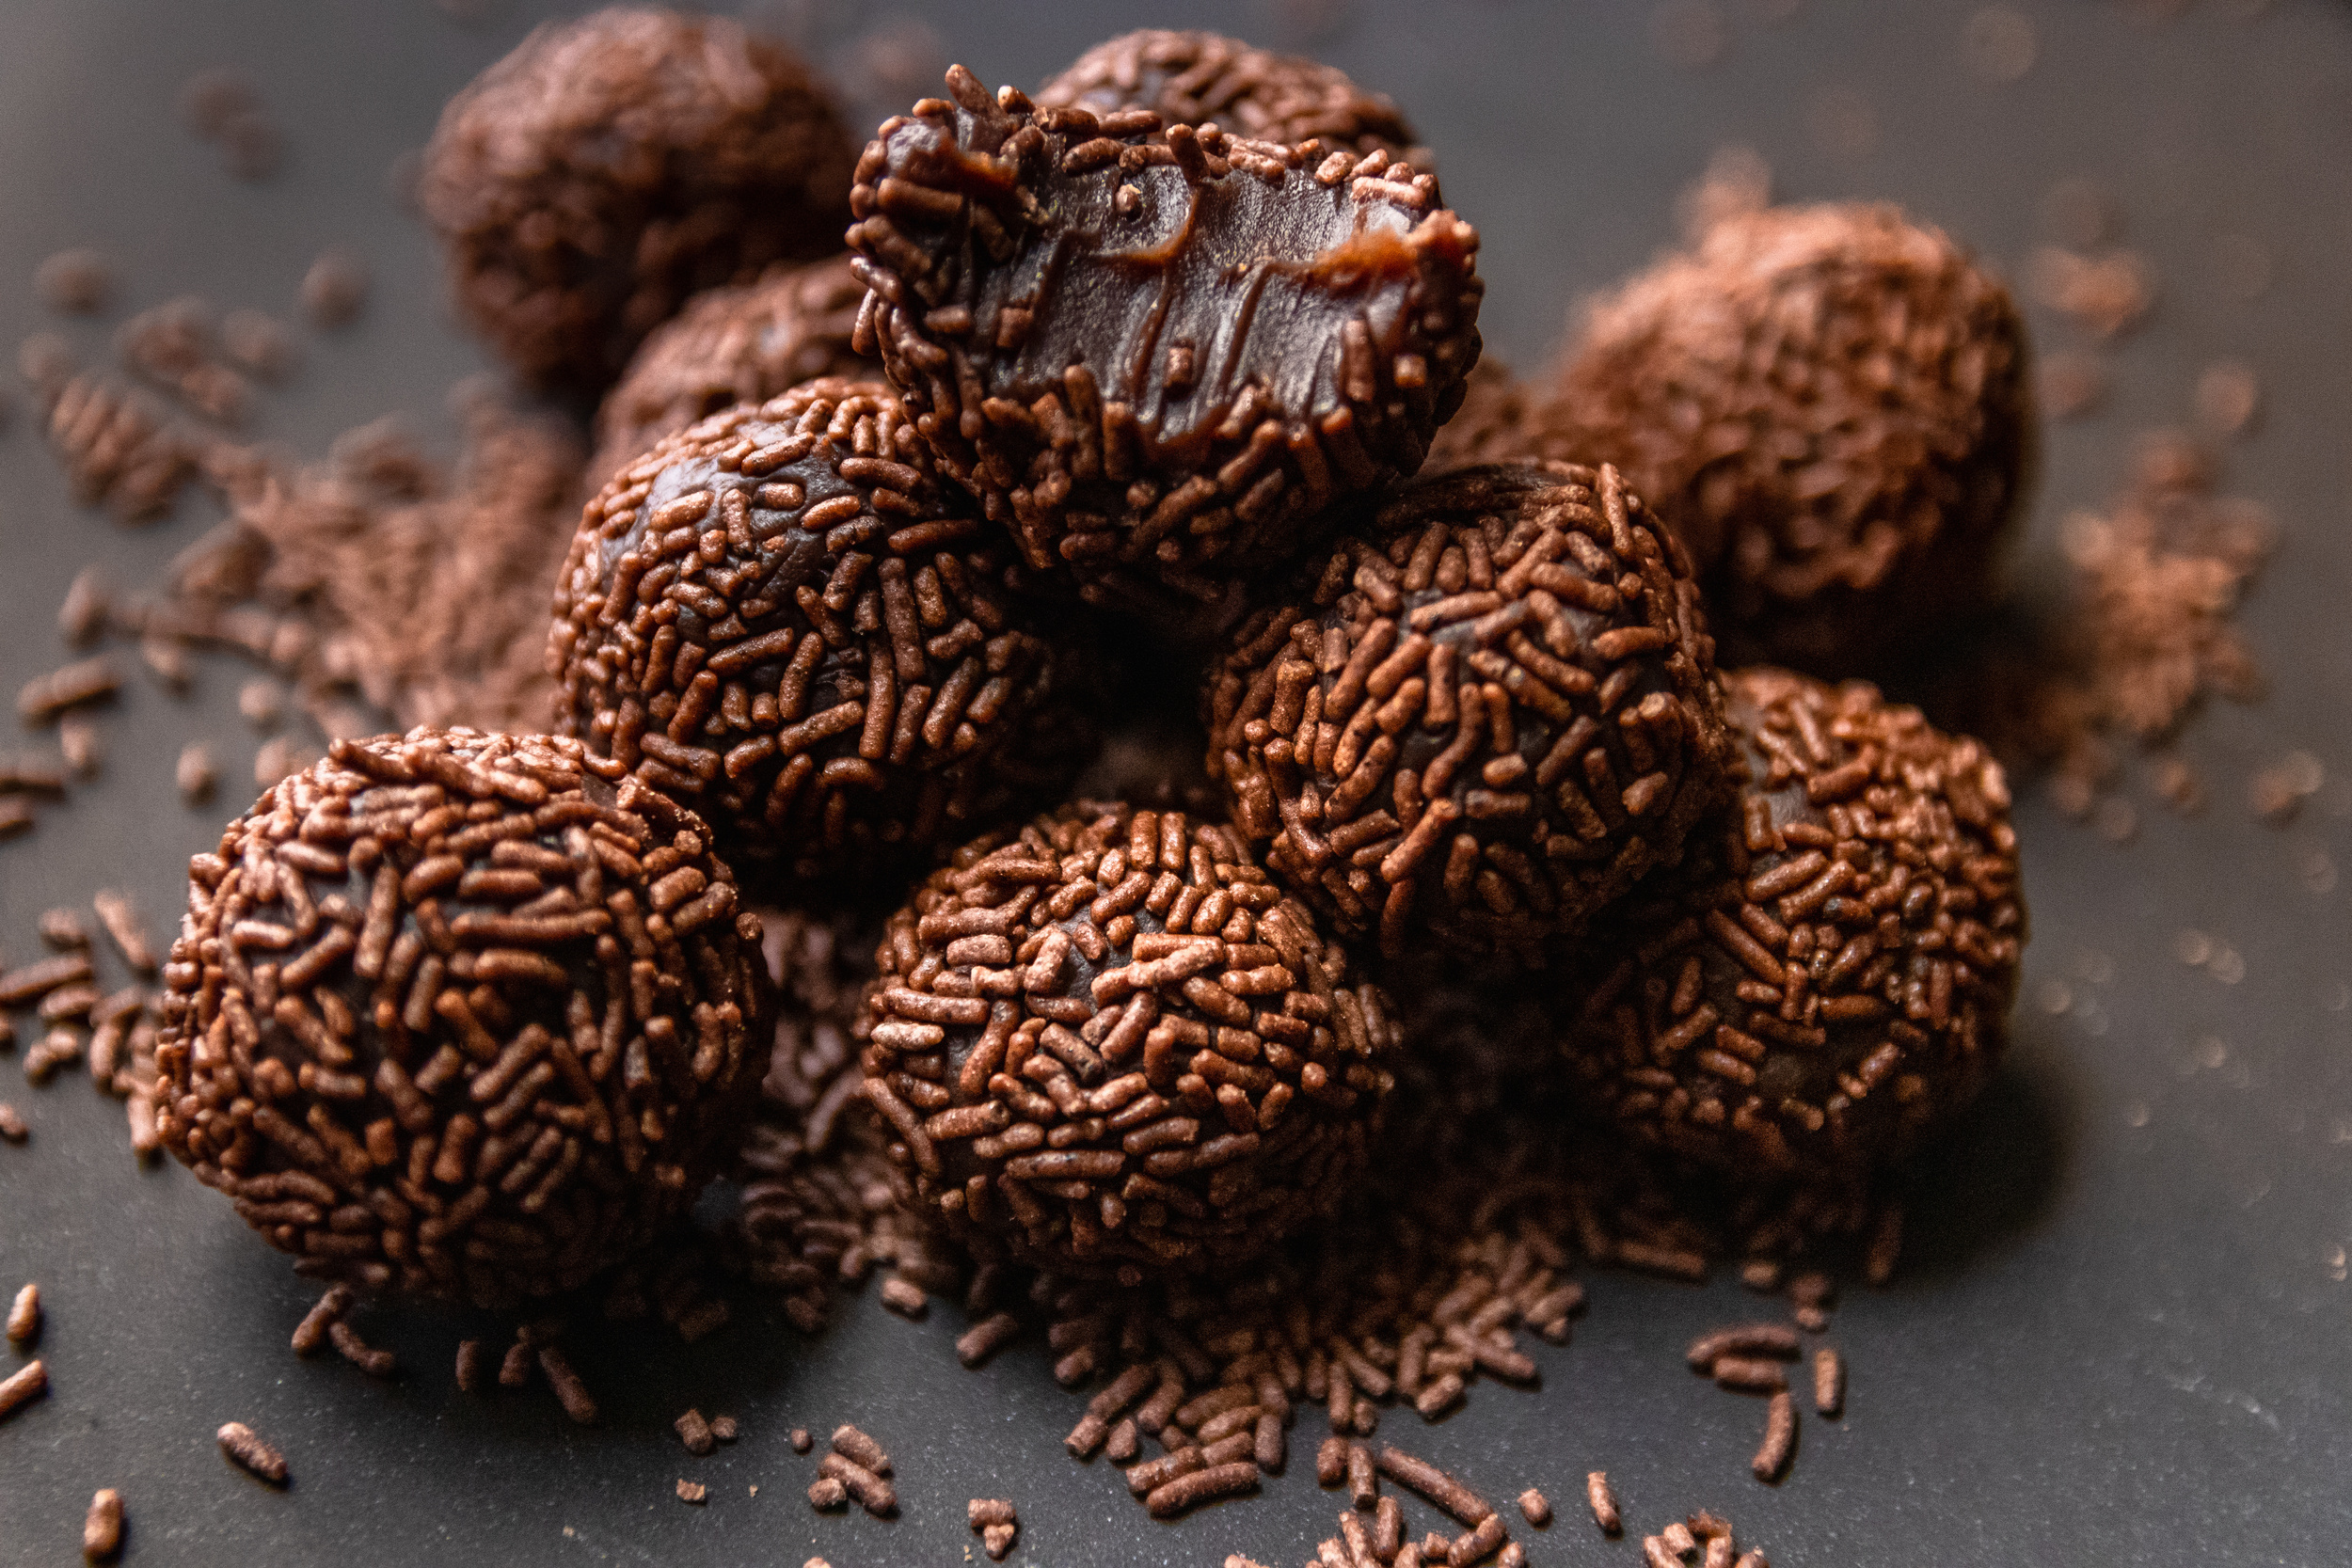 <p>These Brazilian <em>brigadeiro</em> beauties are chocolate BOMBS! Similar to a truffle, they are rich, dense, and look like something you’d get at a high-end chocolatier…but they’re actually easy to make, requiring only five simple ingredients and about 45 minutes of prep and cooking time. <a href="https://www.iheartbrazil.com/brigadeiro-recipe/"><span>Get the scoop from I Heart Brazil</span></a>.</p><p><a href='https://www.msn.com/en-us/community/channel/vid-cj9pqbr0vn9in2b6ddcd8sfgpfq6x6utp44fssrv6mc2gtybw0us'>Follow us on MSN to see more of our exclusive lifestyle content.</a></p>